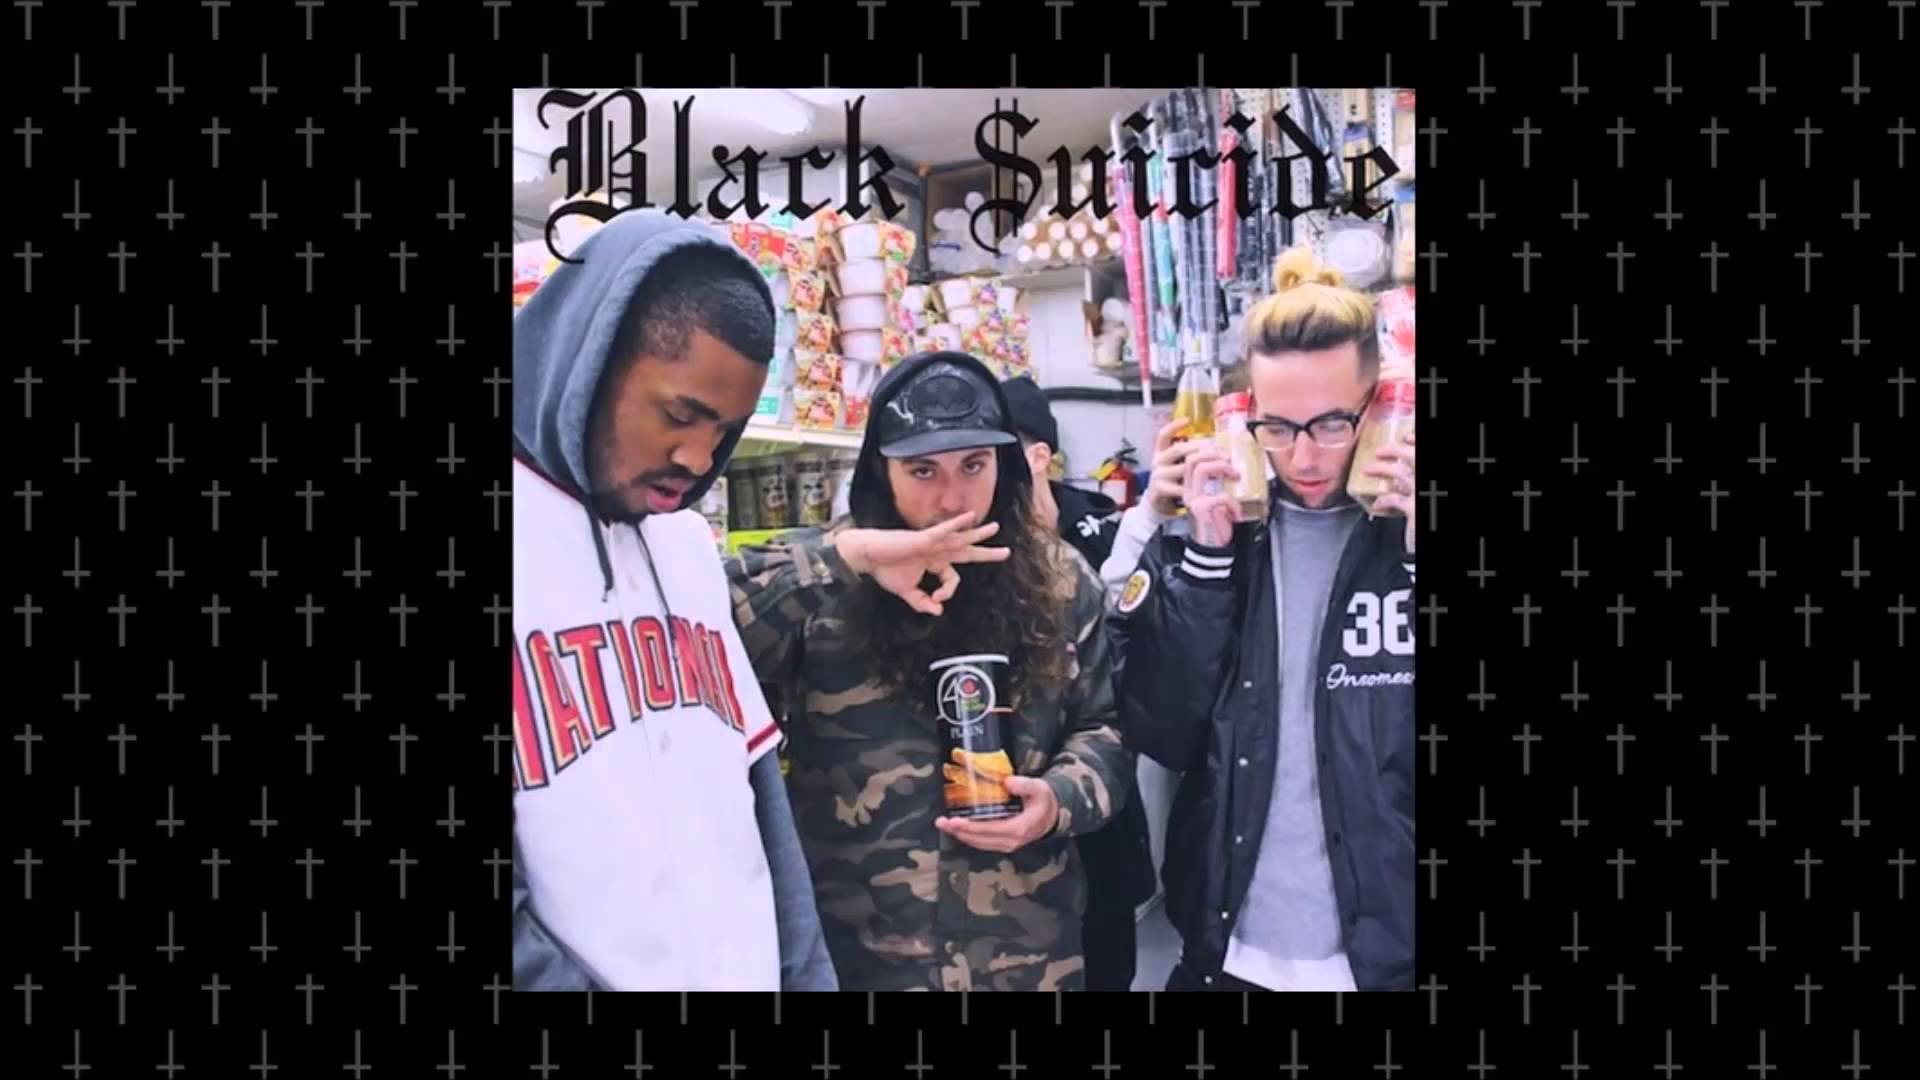 UICIDEBOY$ x BLACK SMURF - .AND SO IT WAS